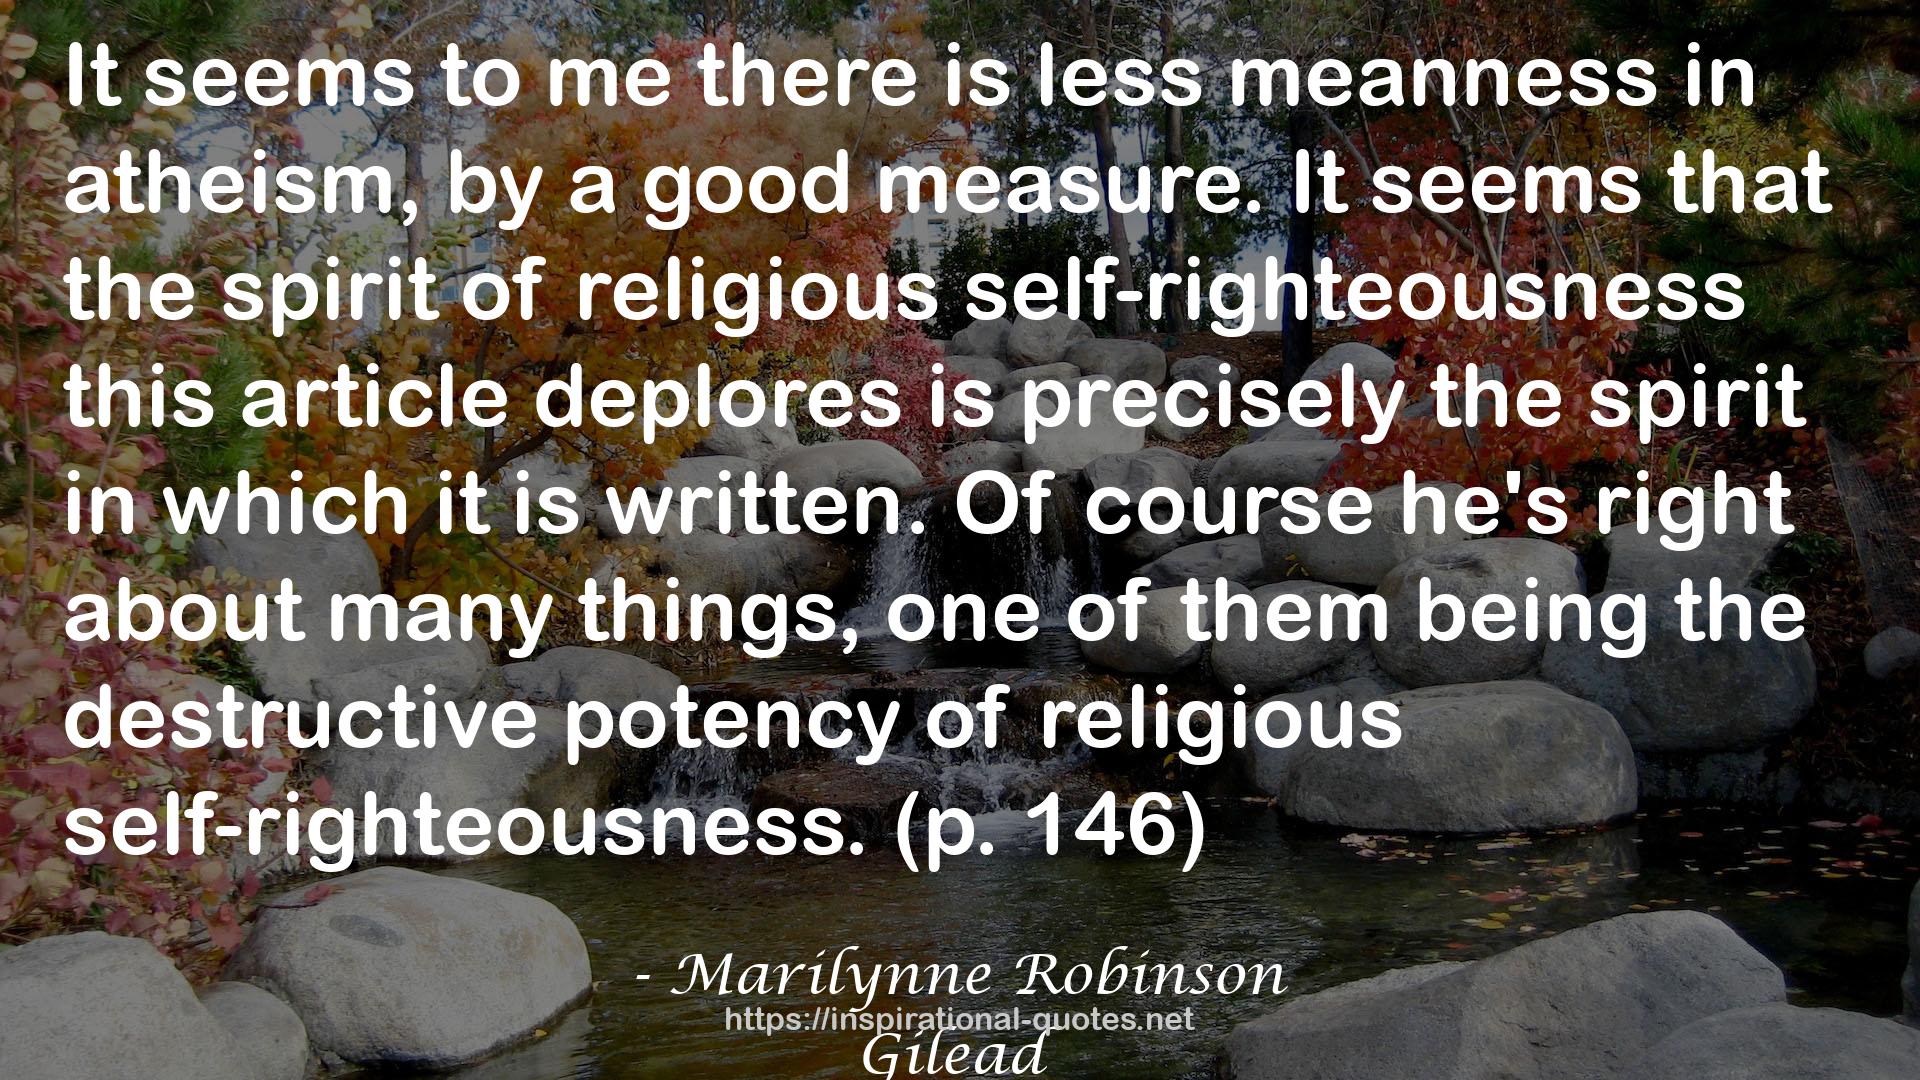 religious self-righteousness  QUOTES